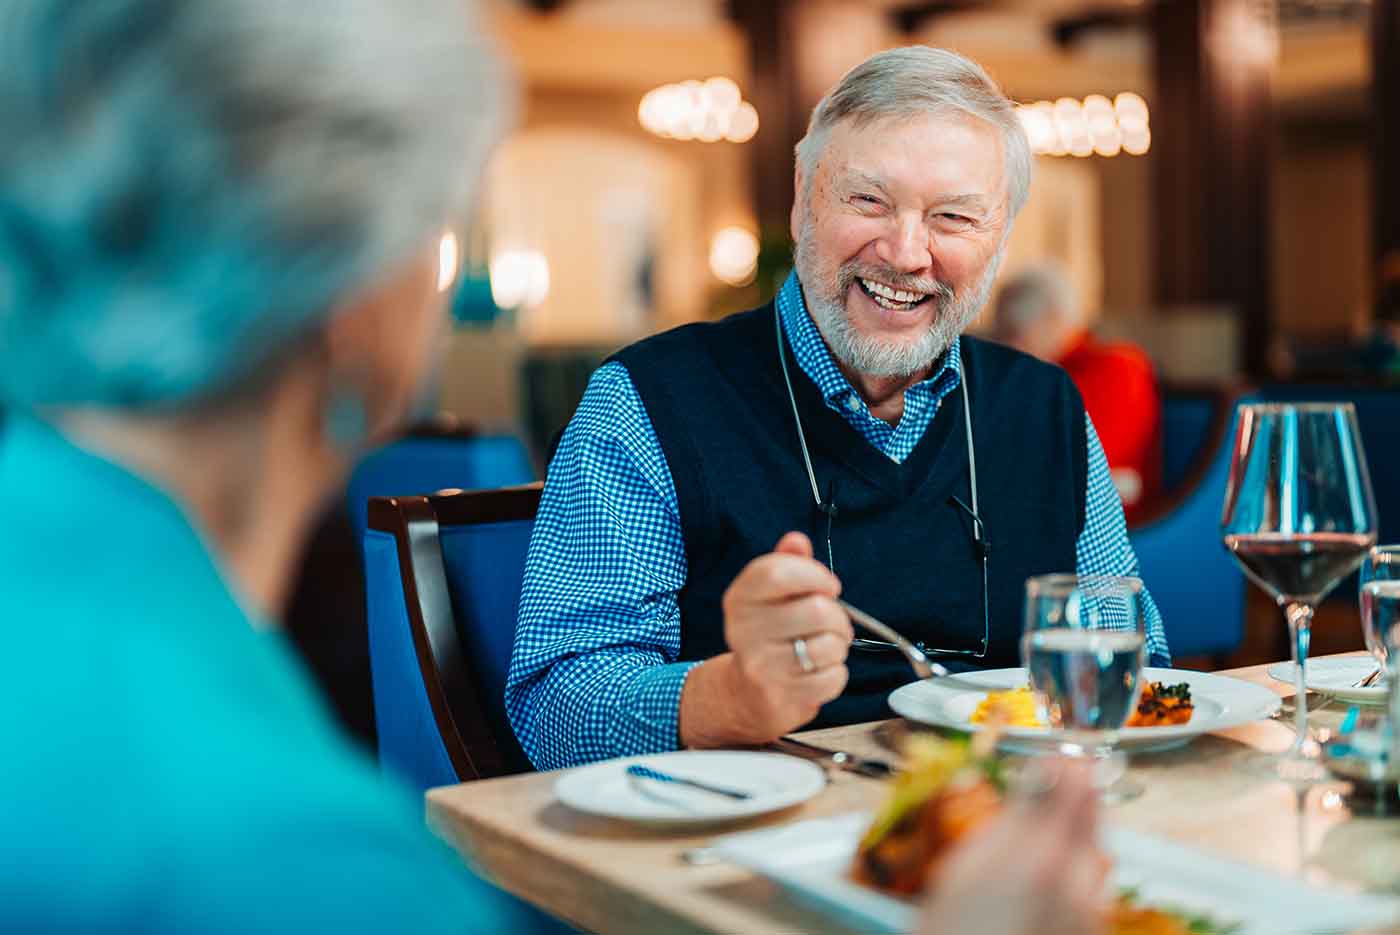 A senior man dines and laughs with a friend across a restaurant table